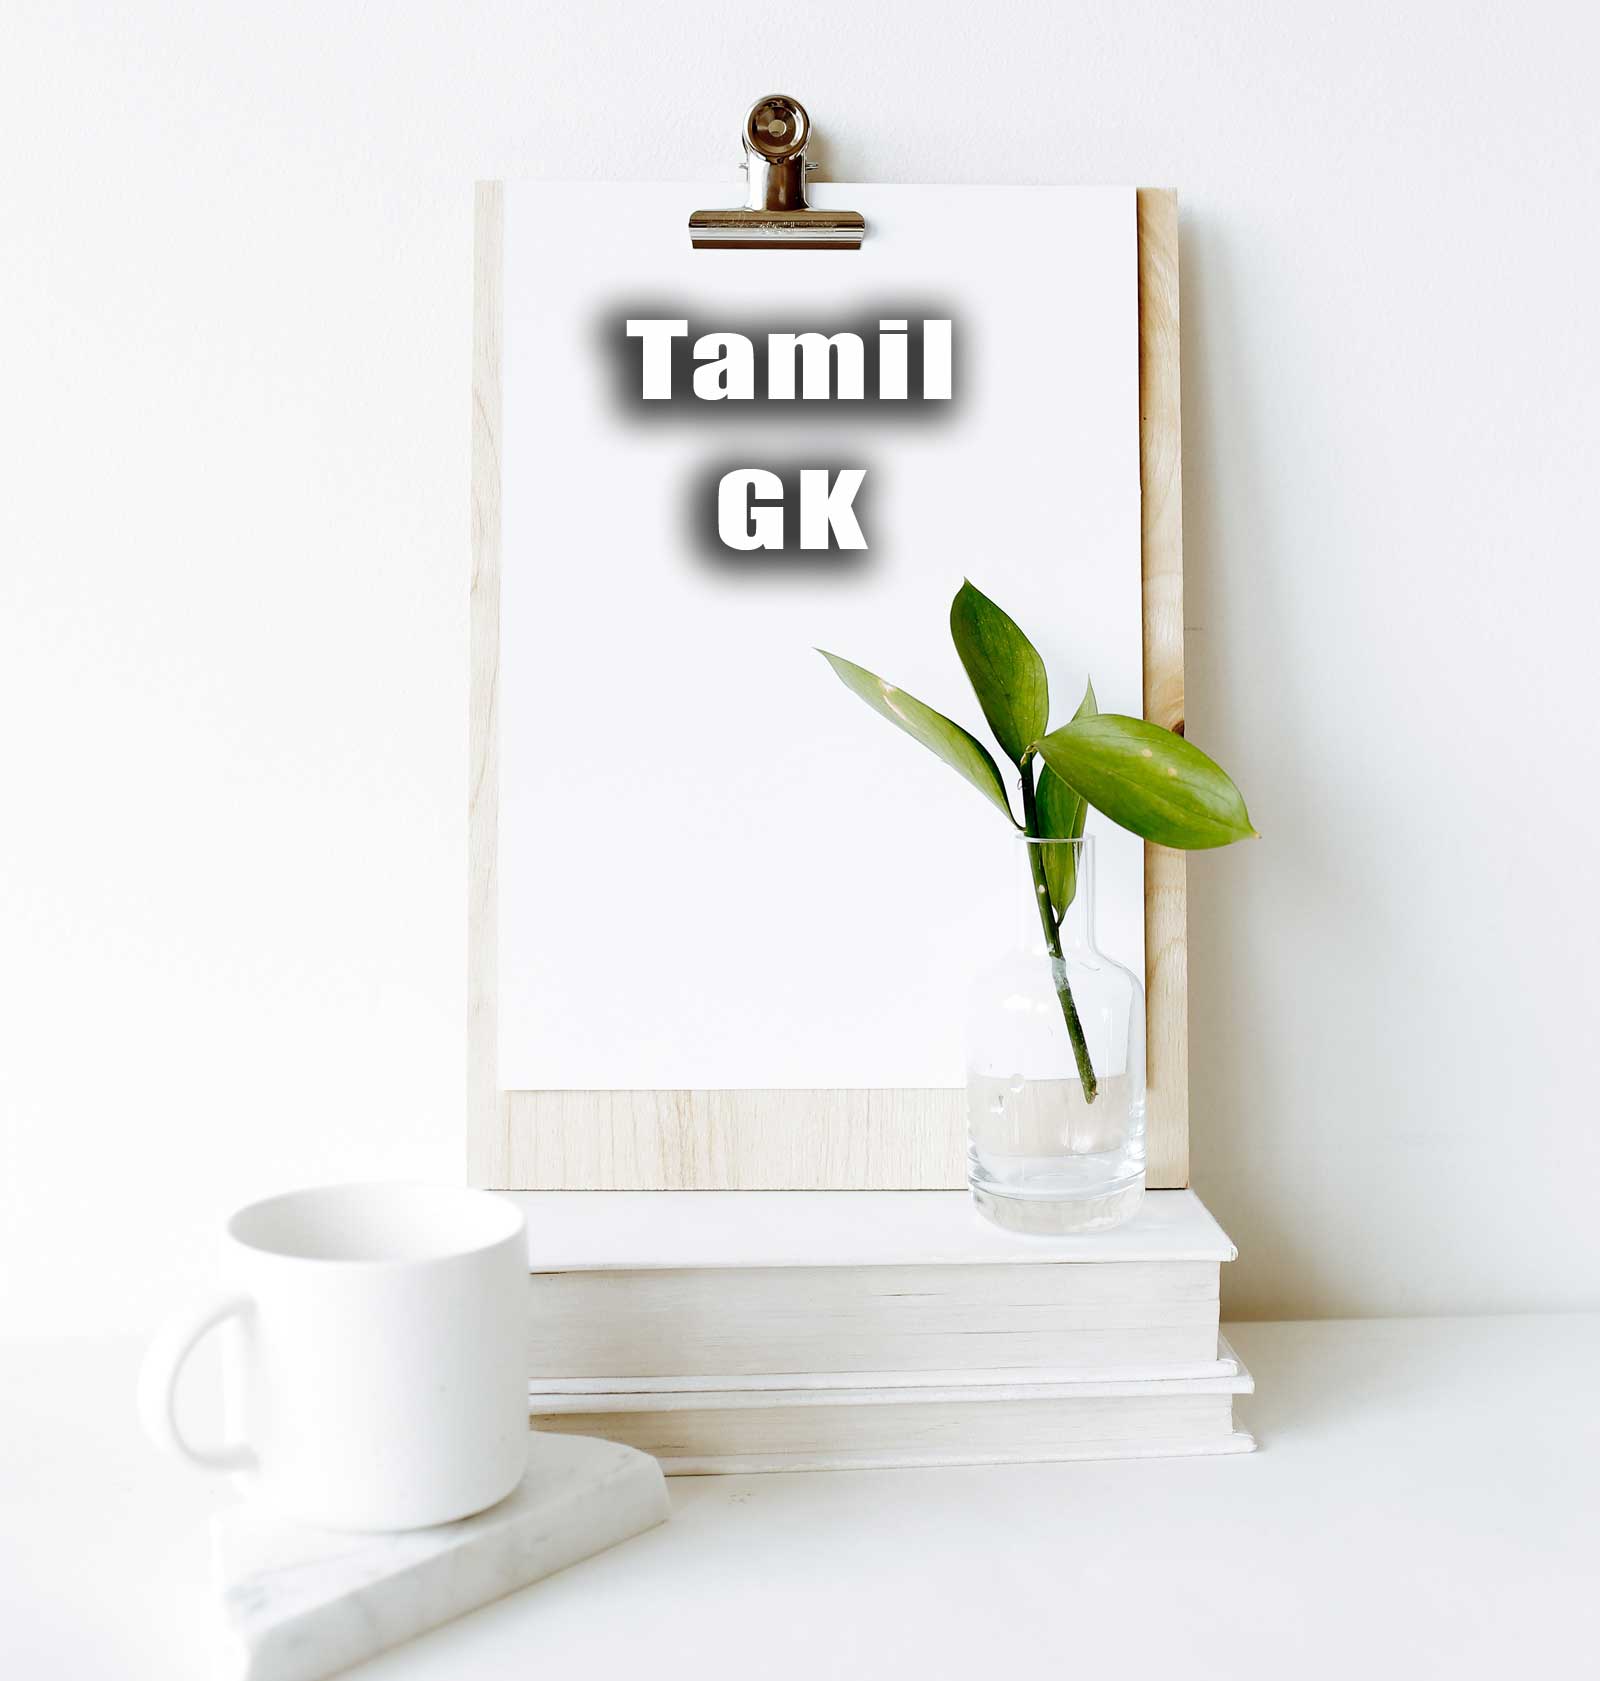 Tamil GK Sample Questions and Answers